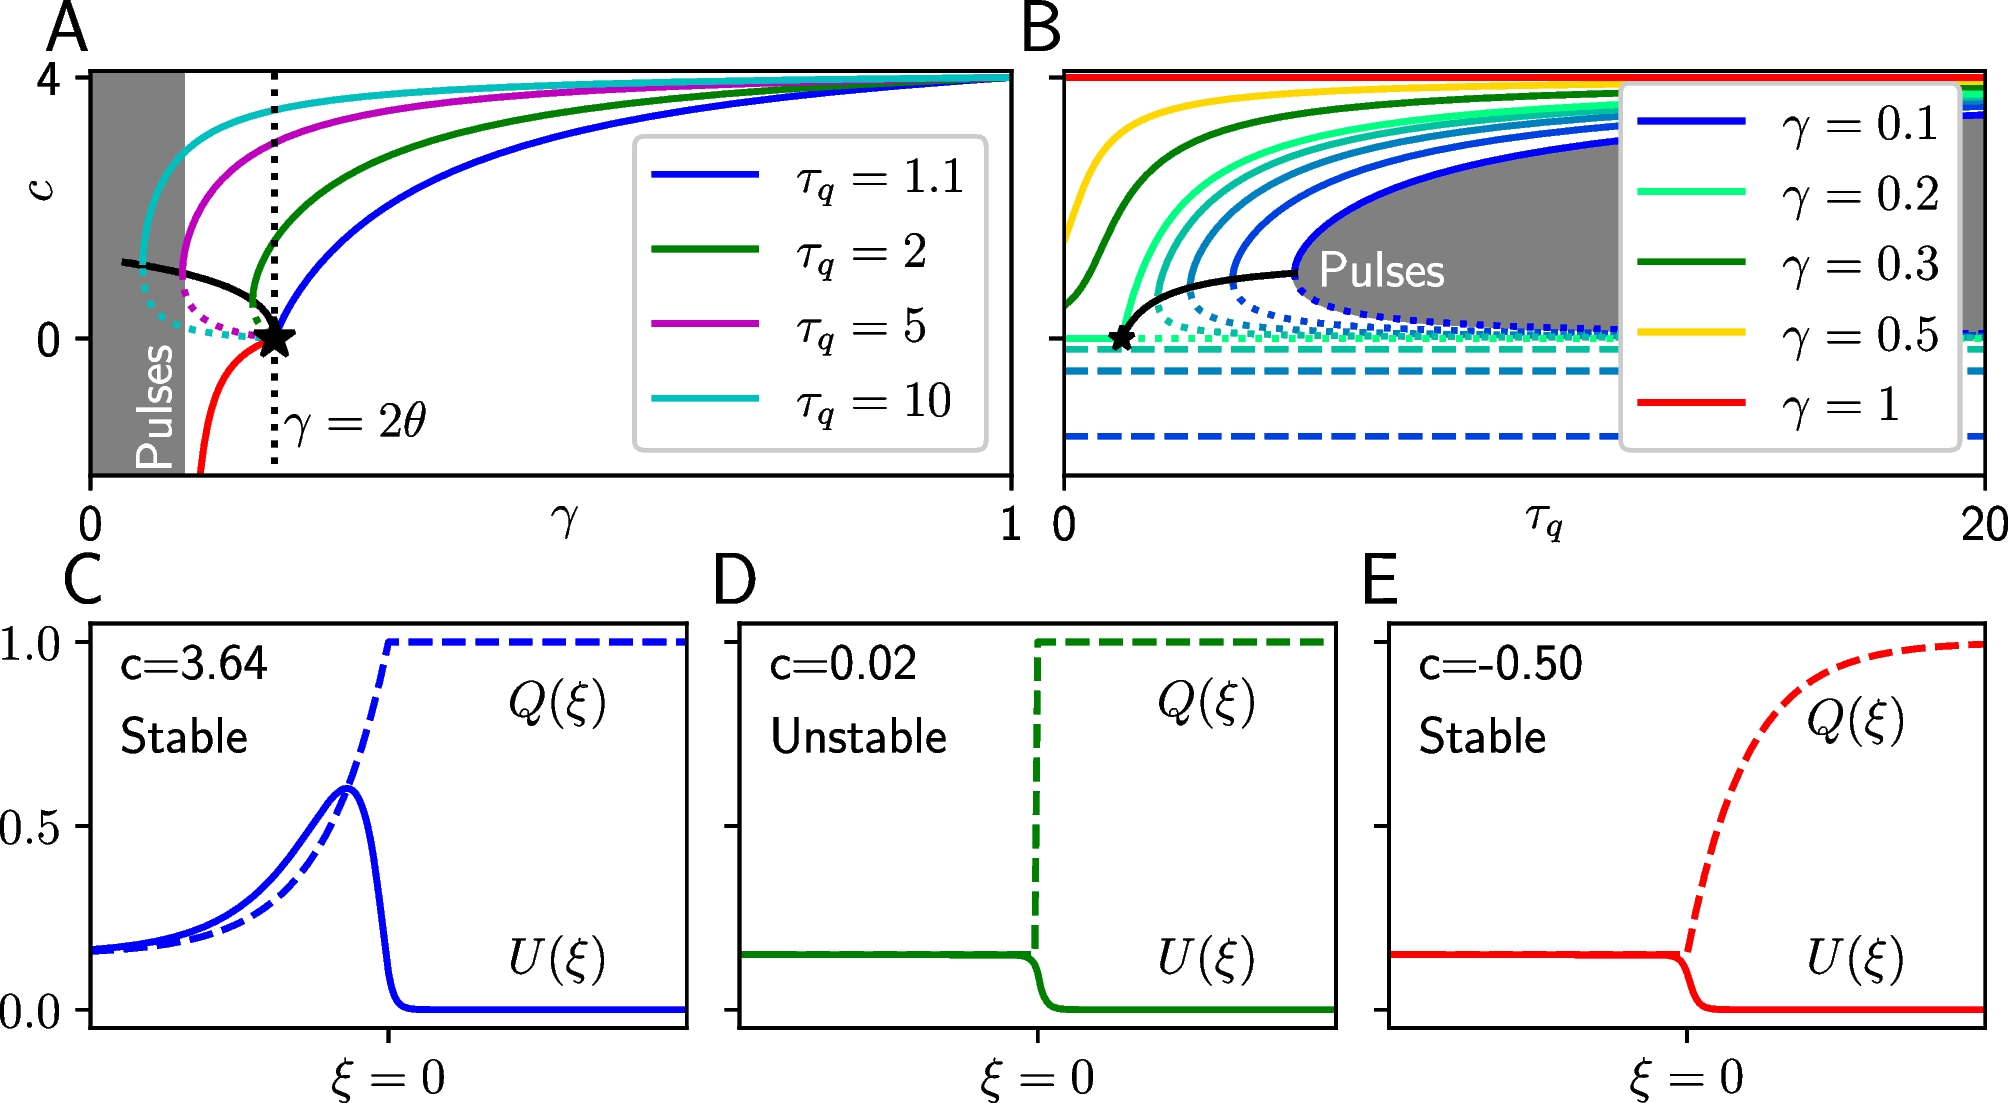 Representing stimulus motion with waves in adaptive neural fields